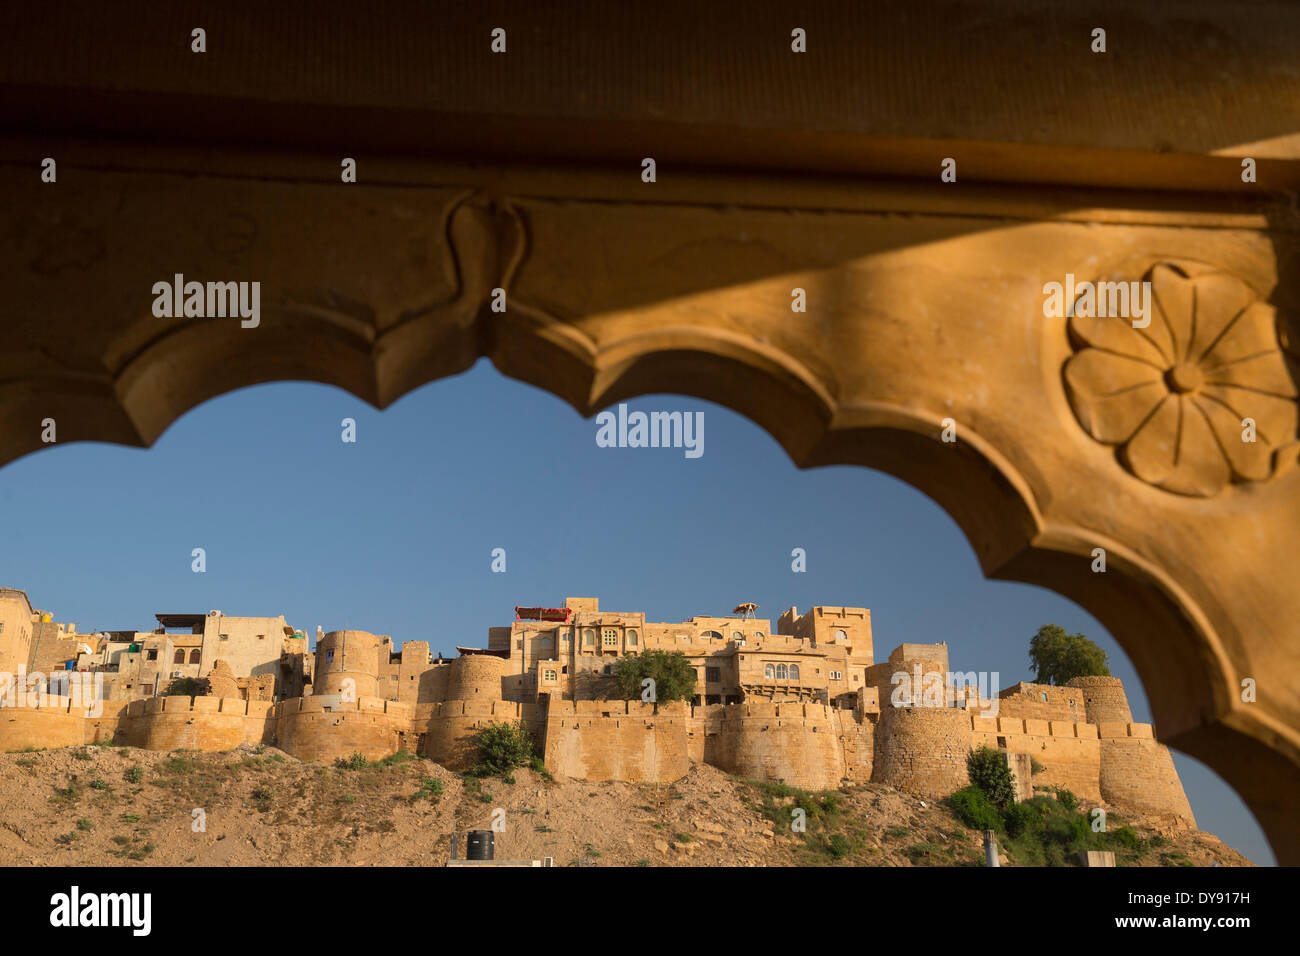 Fort, Jaisalmer, Rajasthan, military wall, bastions, Asia, India, town, city, Stock Photo